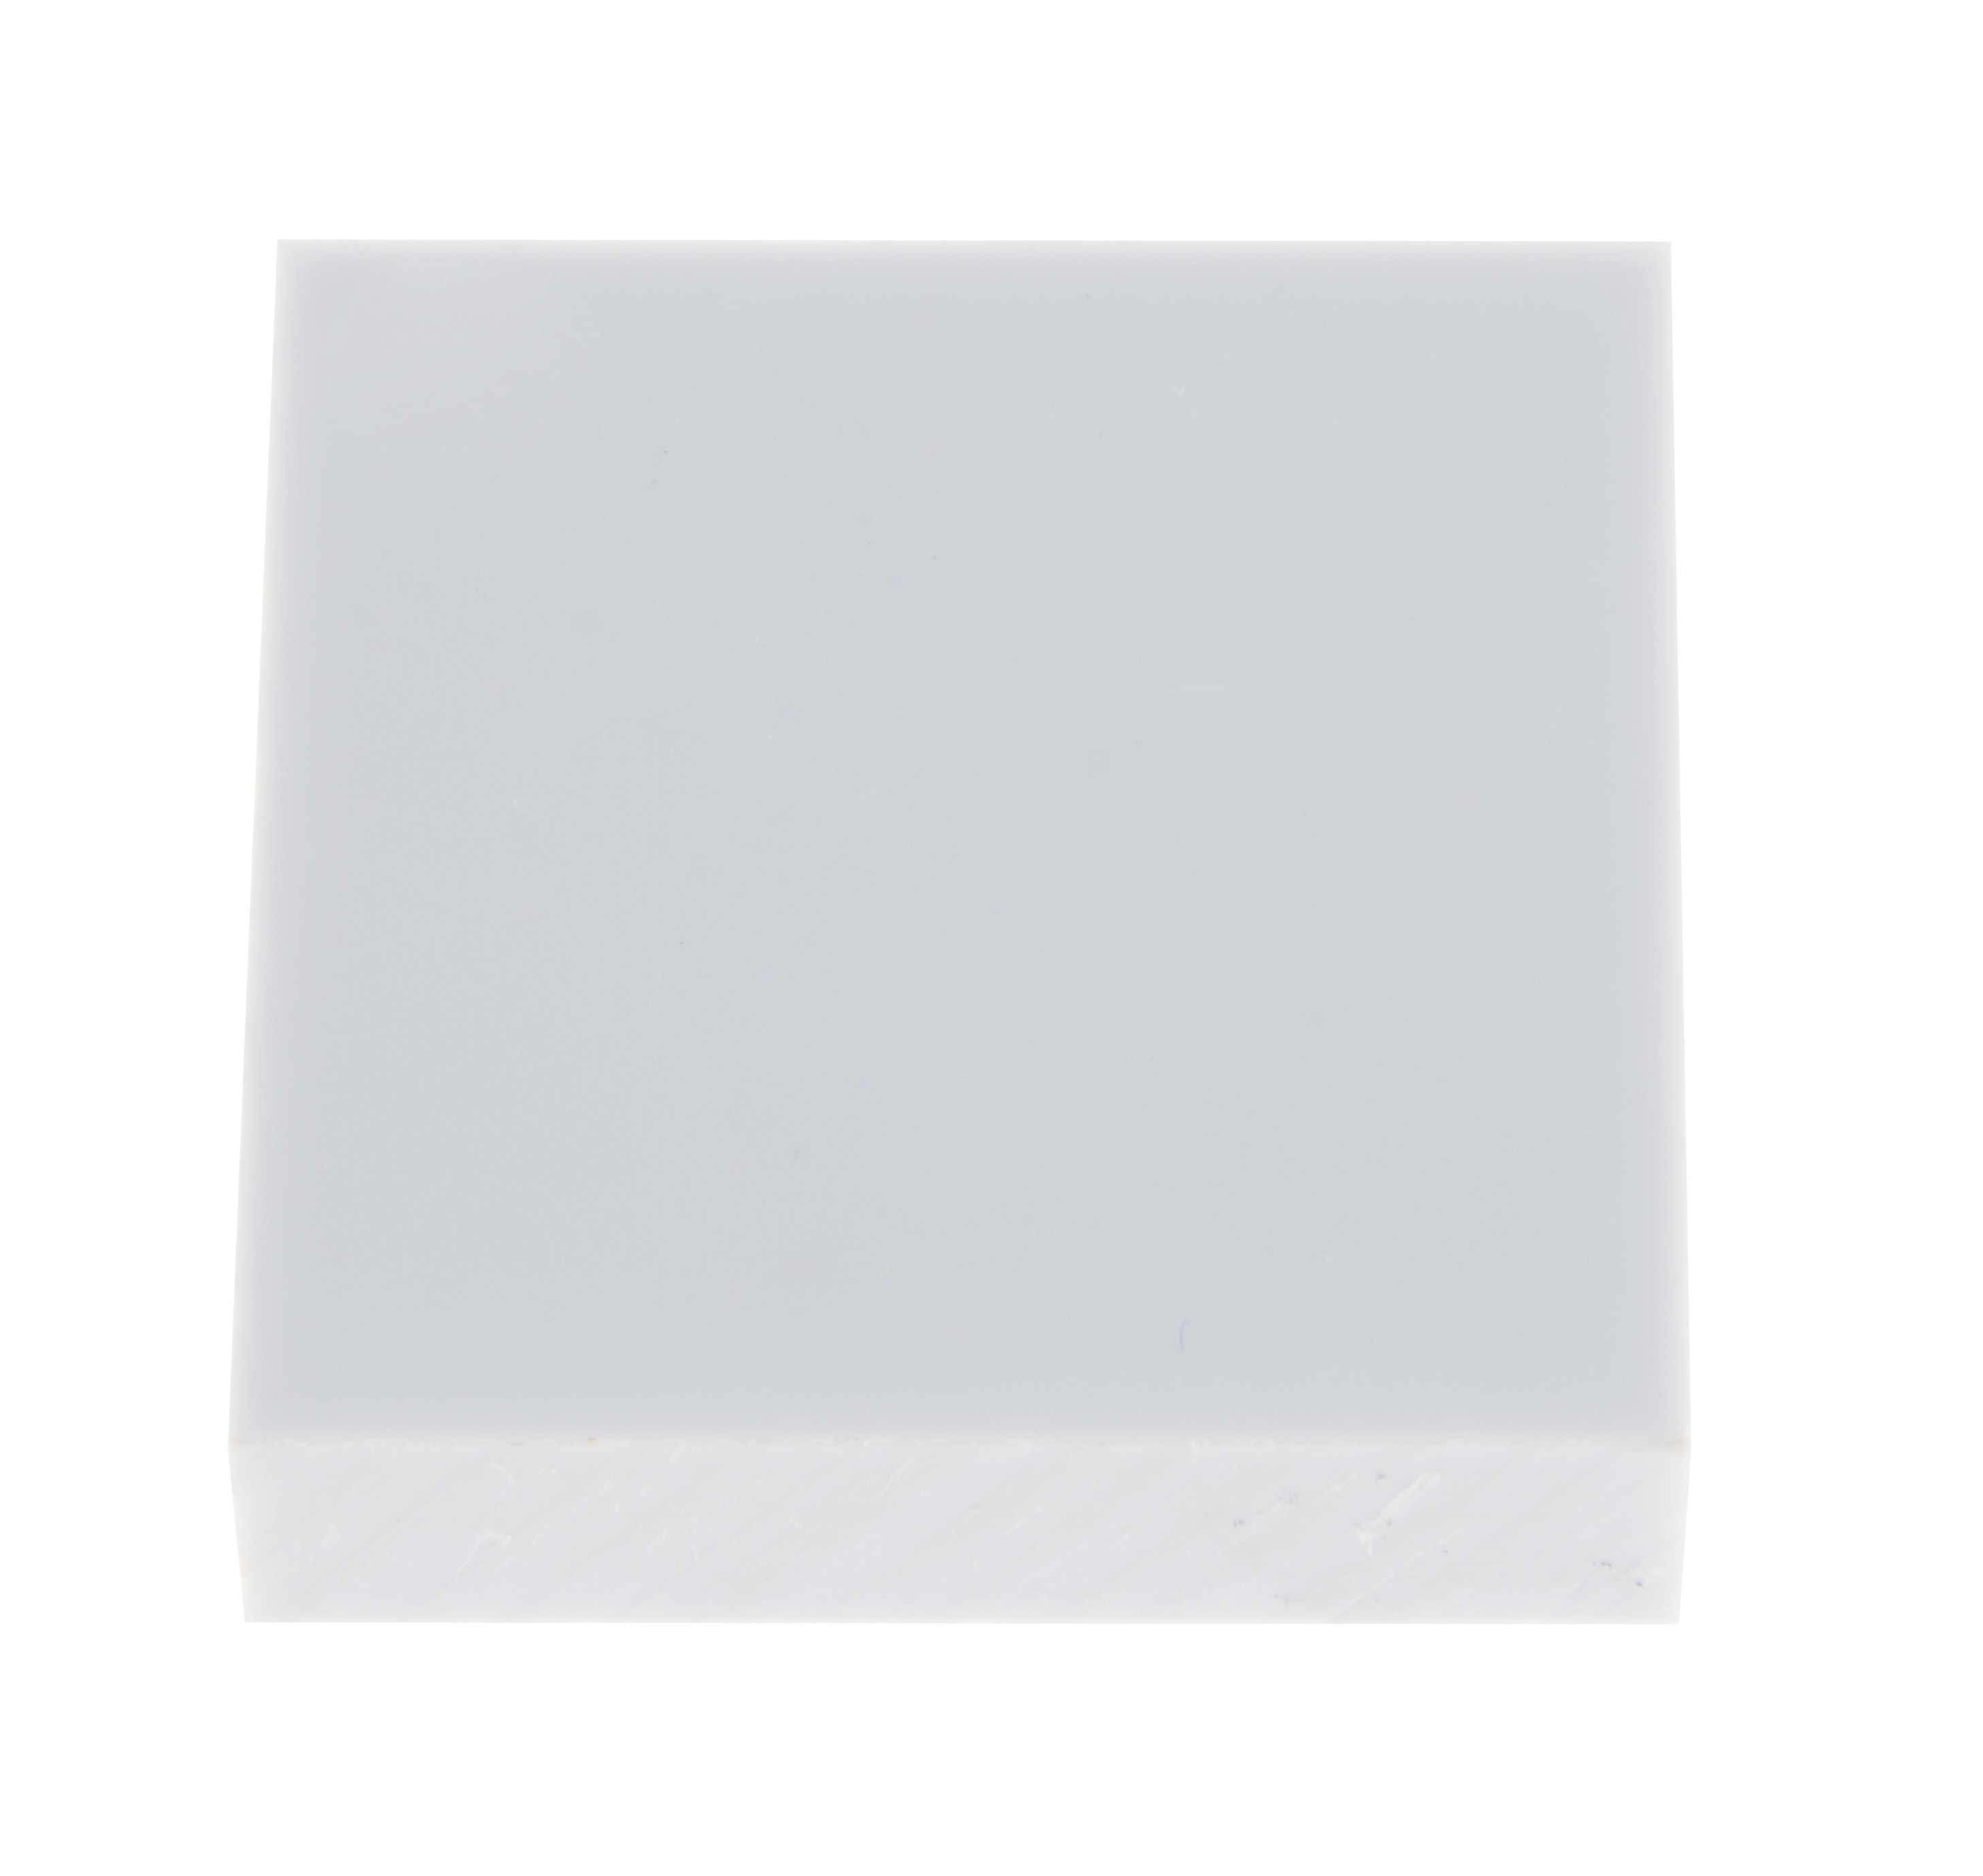 US Stock 20mm x 3.937" x 3.937" UHMW PE Plastic Sheet Plate Natural White 